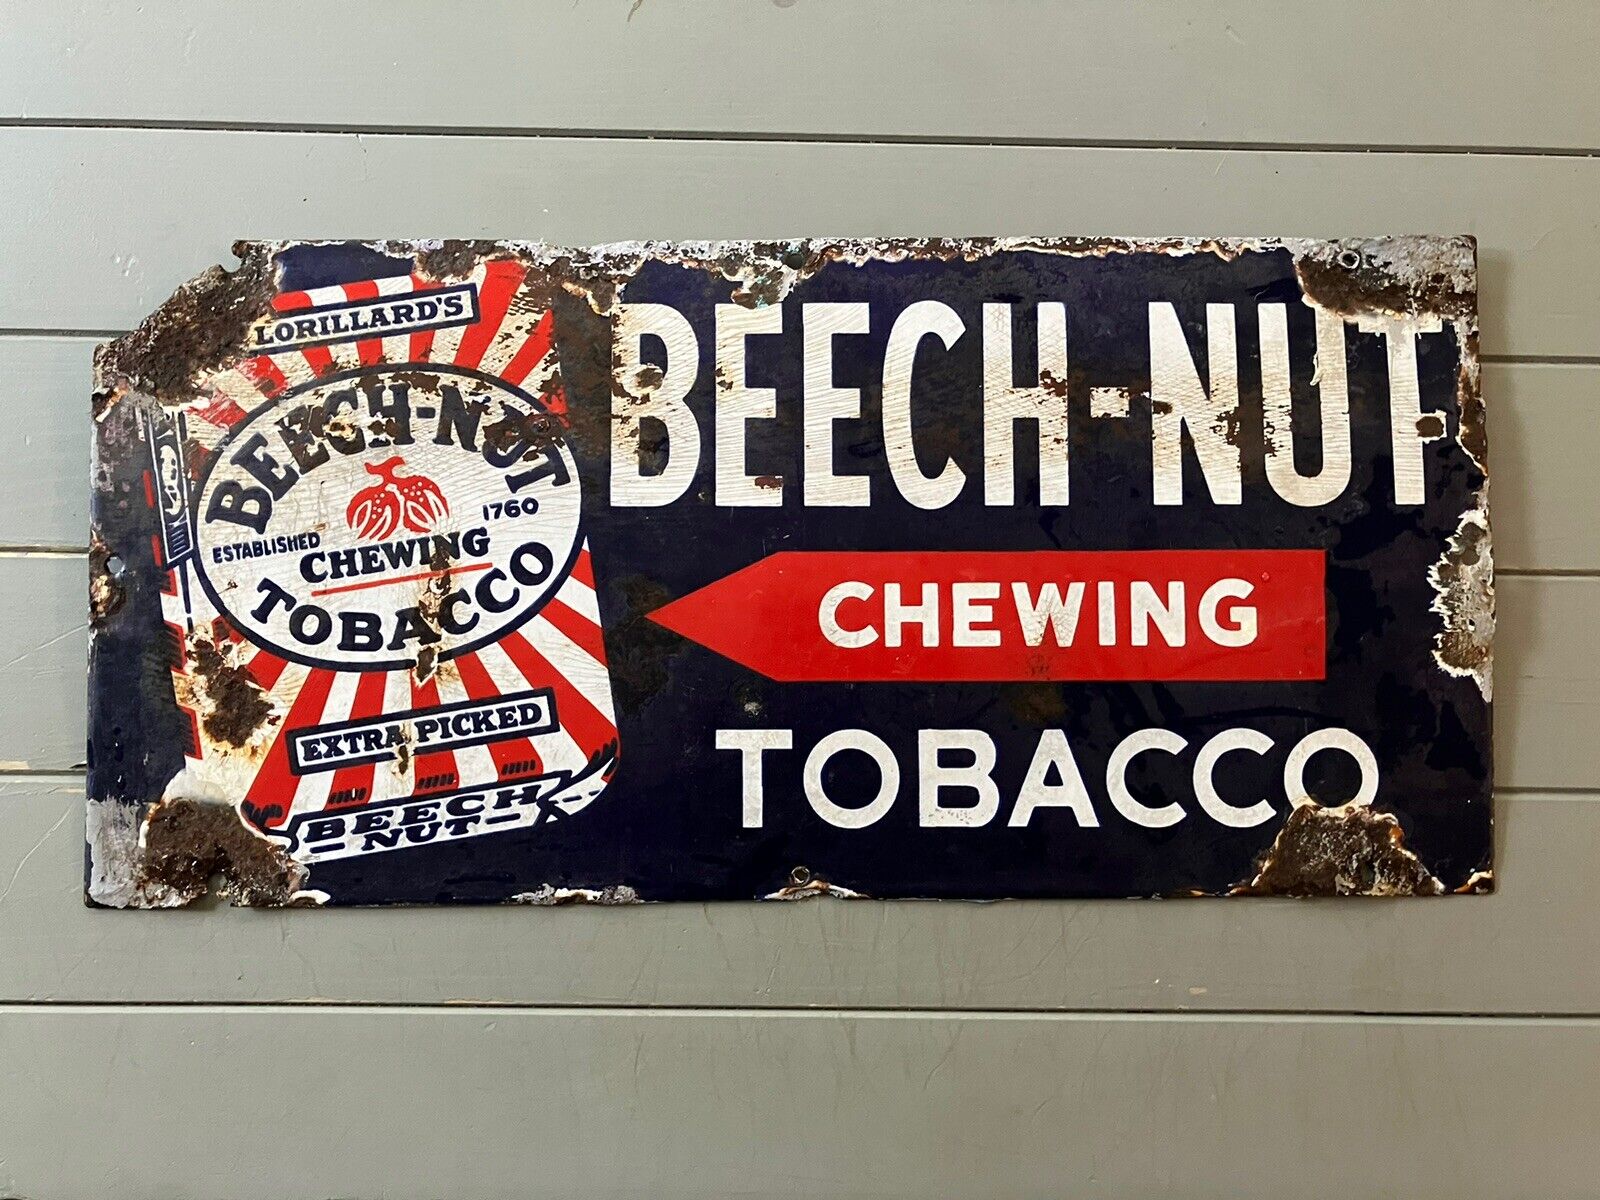 EARLY ANTIQUE BEECH-NUT CHEWING TOBACCO PORCELAIN SIGN ADVERTISING 22x10.5” #46